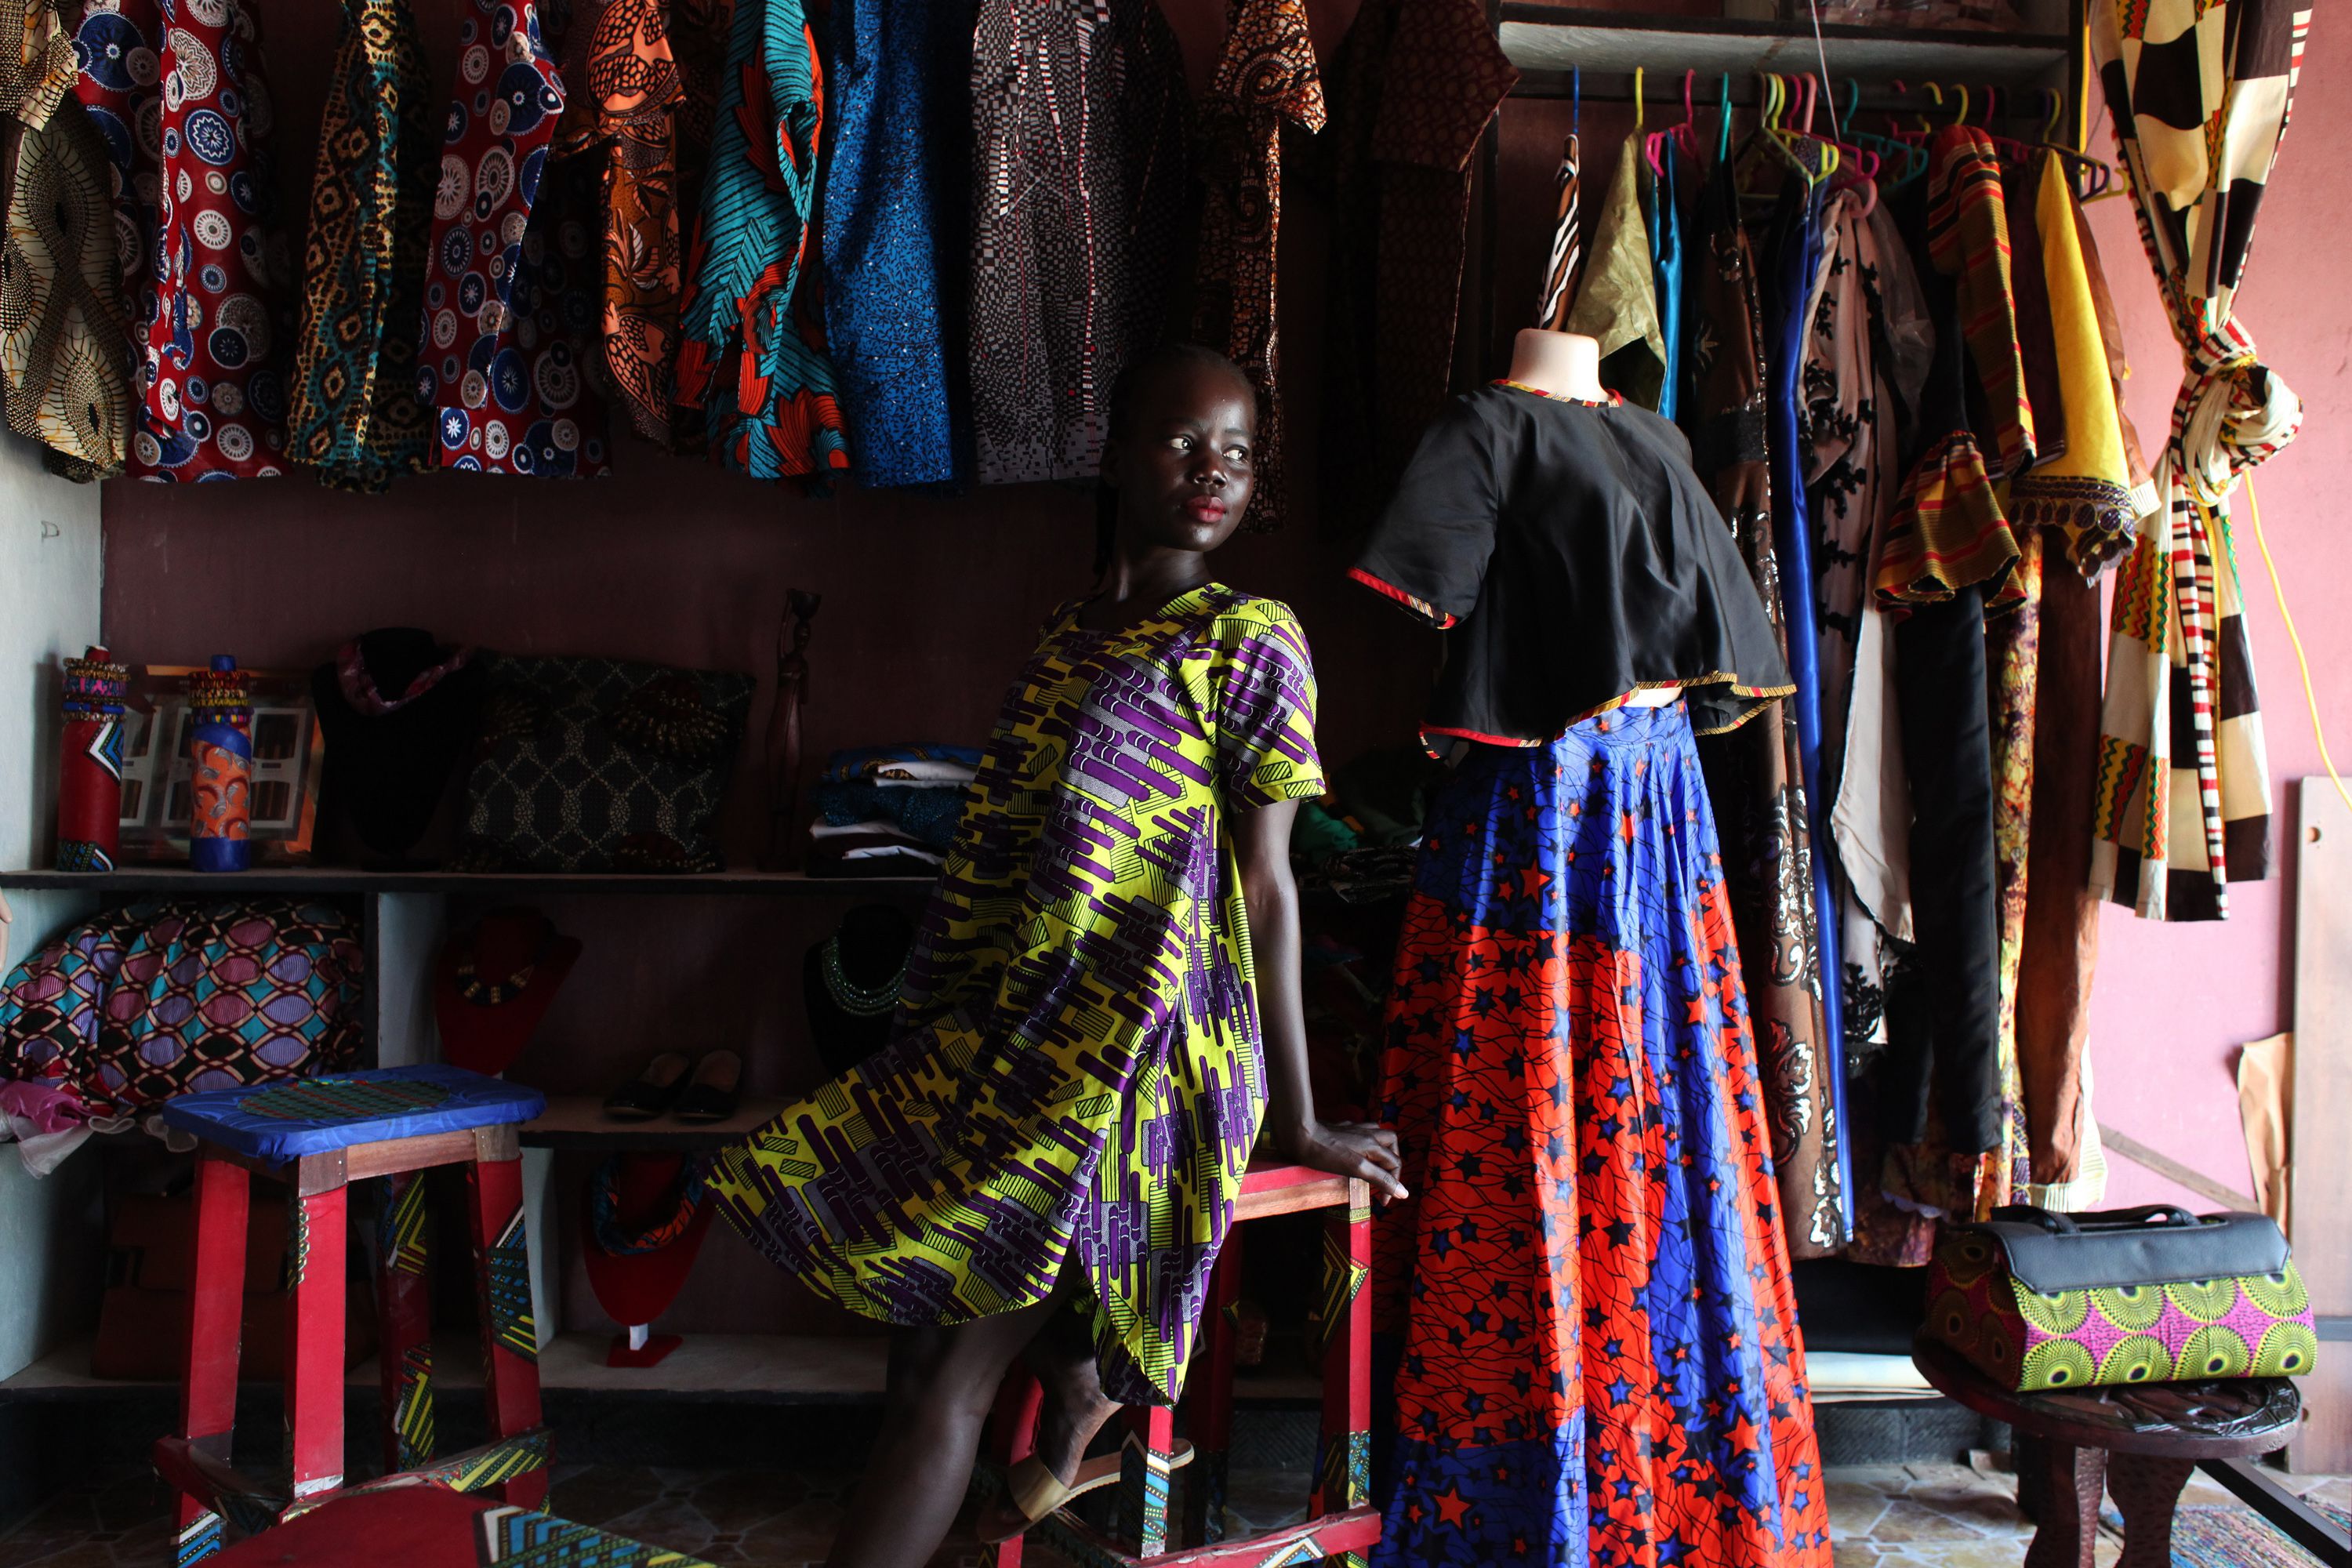 South Sudanese designer Winnie Godi is posing for a photo in her shop in Juba. Image by Andreea Campeanu. South Sudan, 2018.